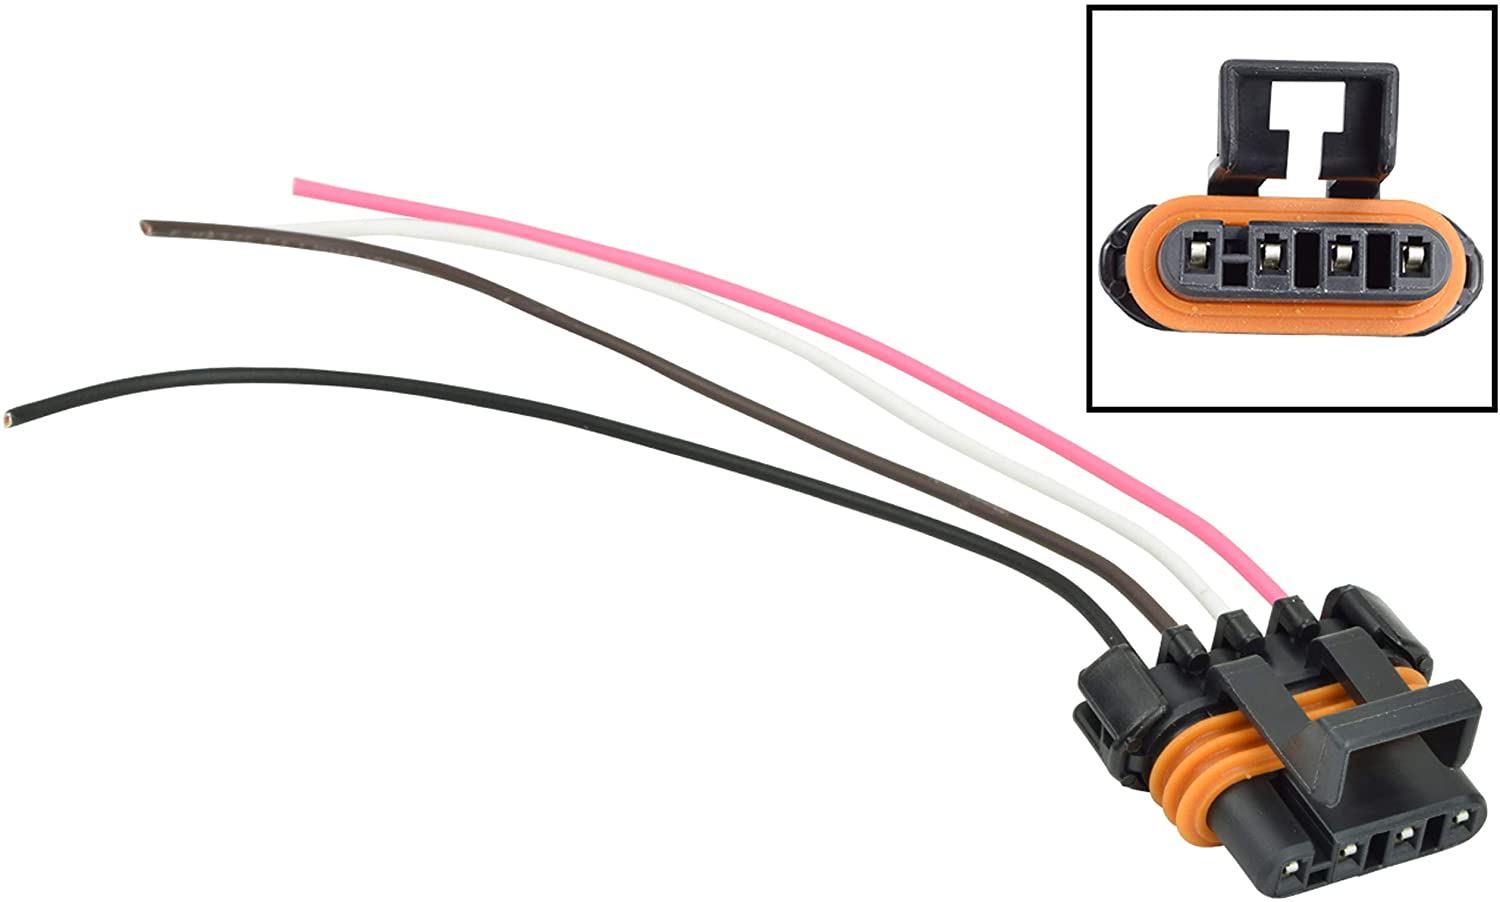 ICT Billet Holley Smart Coils IGN-1A 5-Wire Ignition Coil Harness Pigtail Connector AMP EFI LS WPCIL29